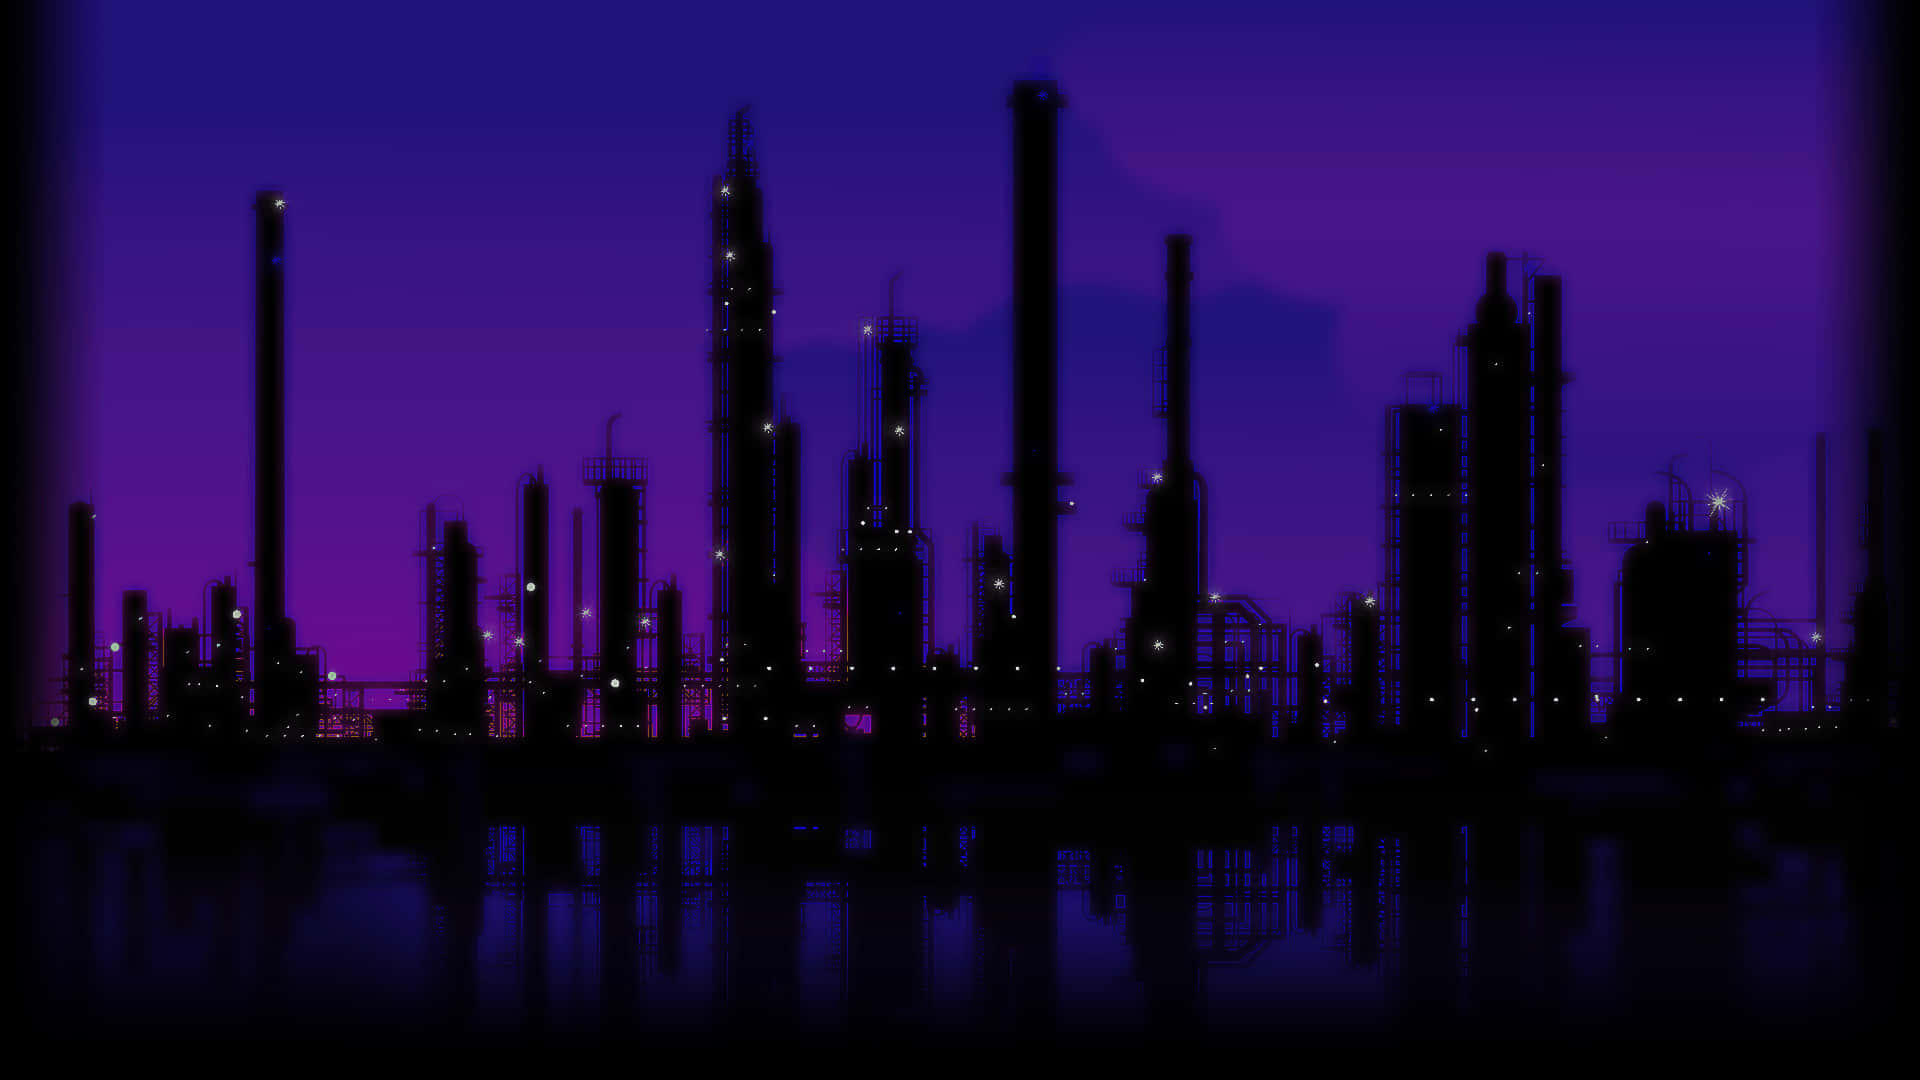 Make a statement with the Purple Aesthetics Computer Wallpaper